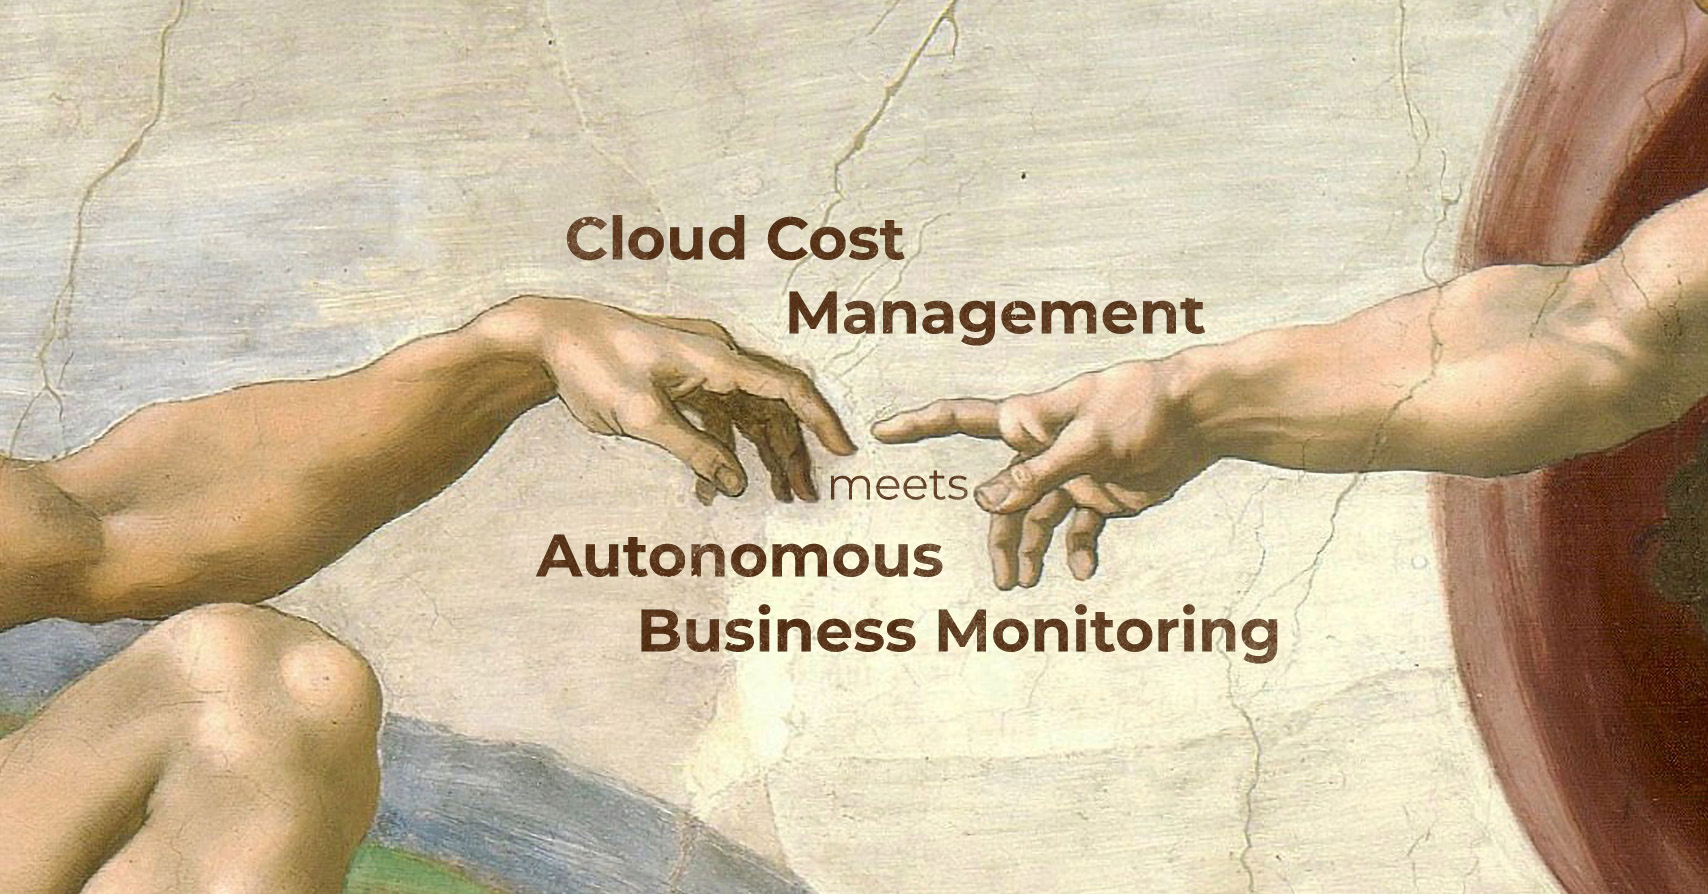 Anodot Acquires Pileus to Transform the Cloud Cost Optimization Space